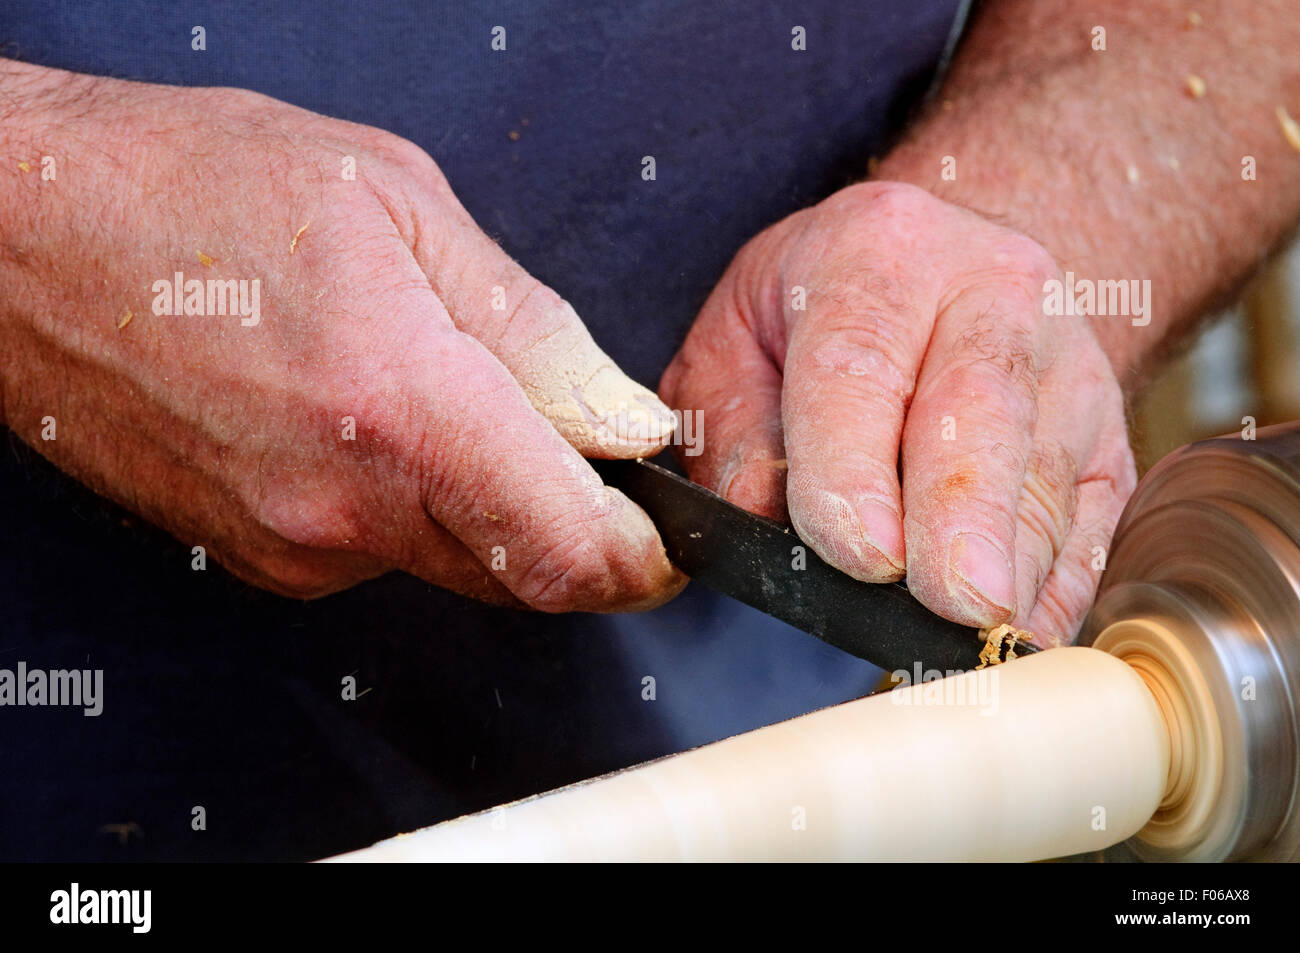 Italy, Lombardy, Turning a Small Piece of Wood. Stock Photo